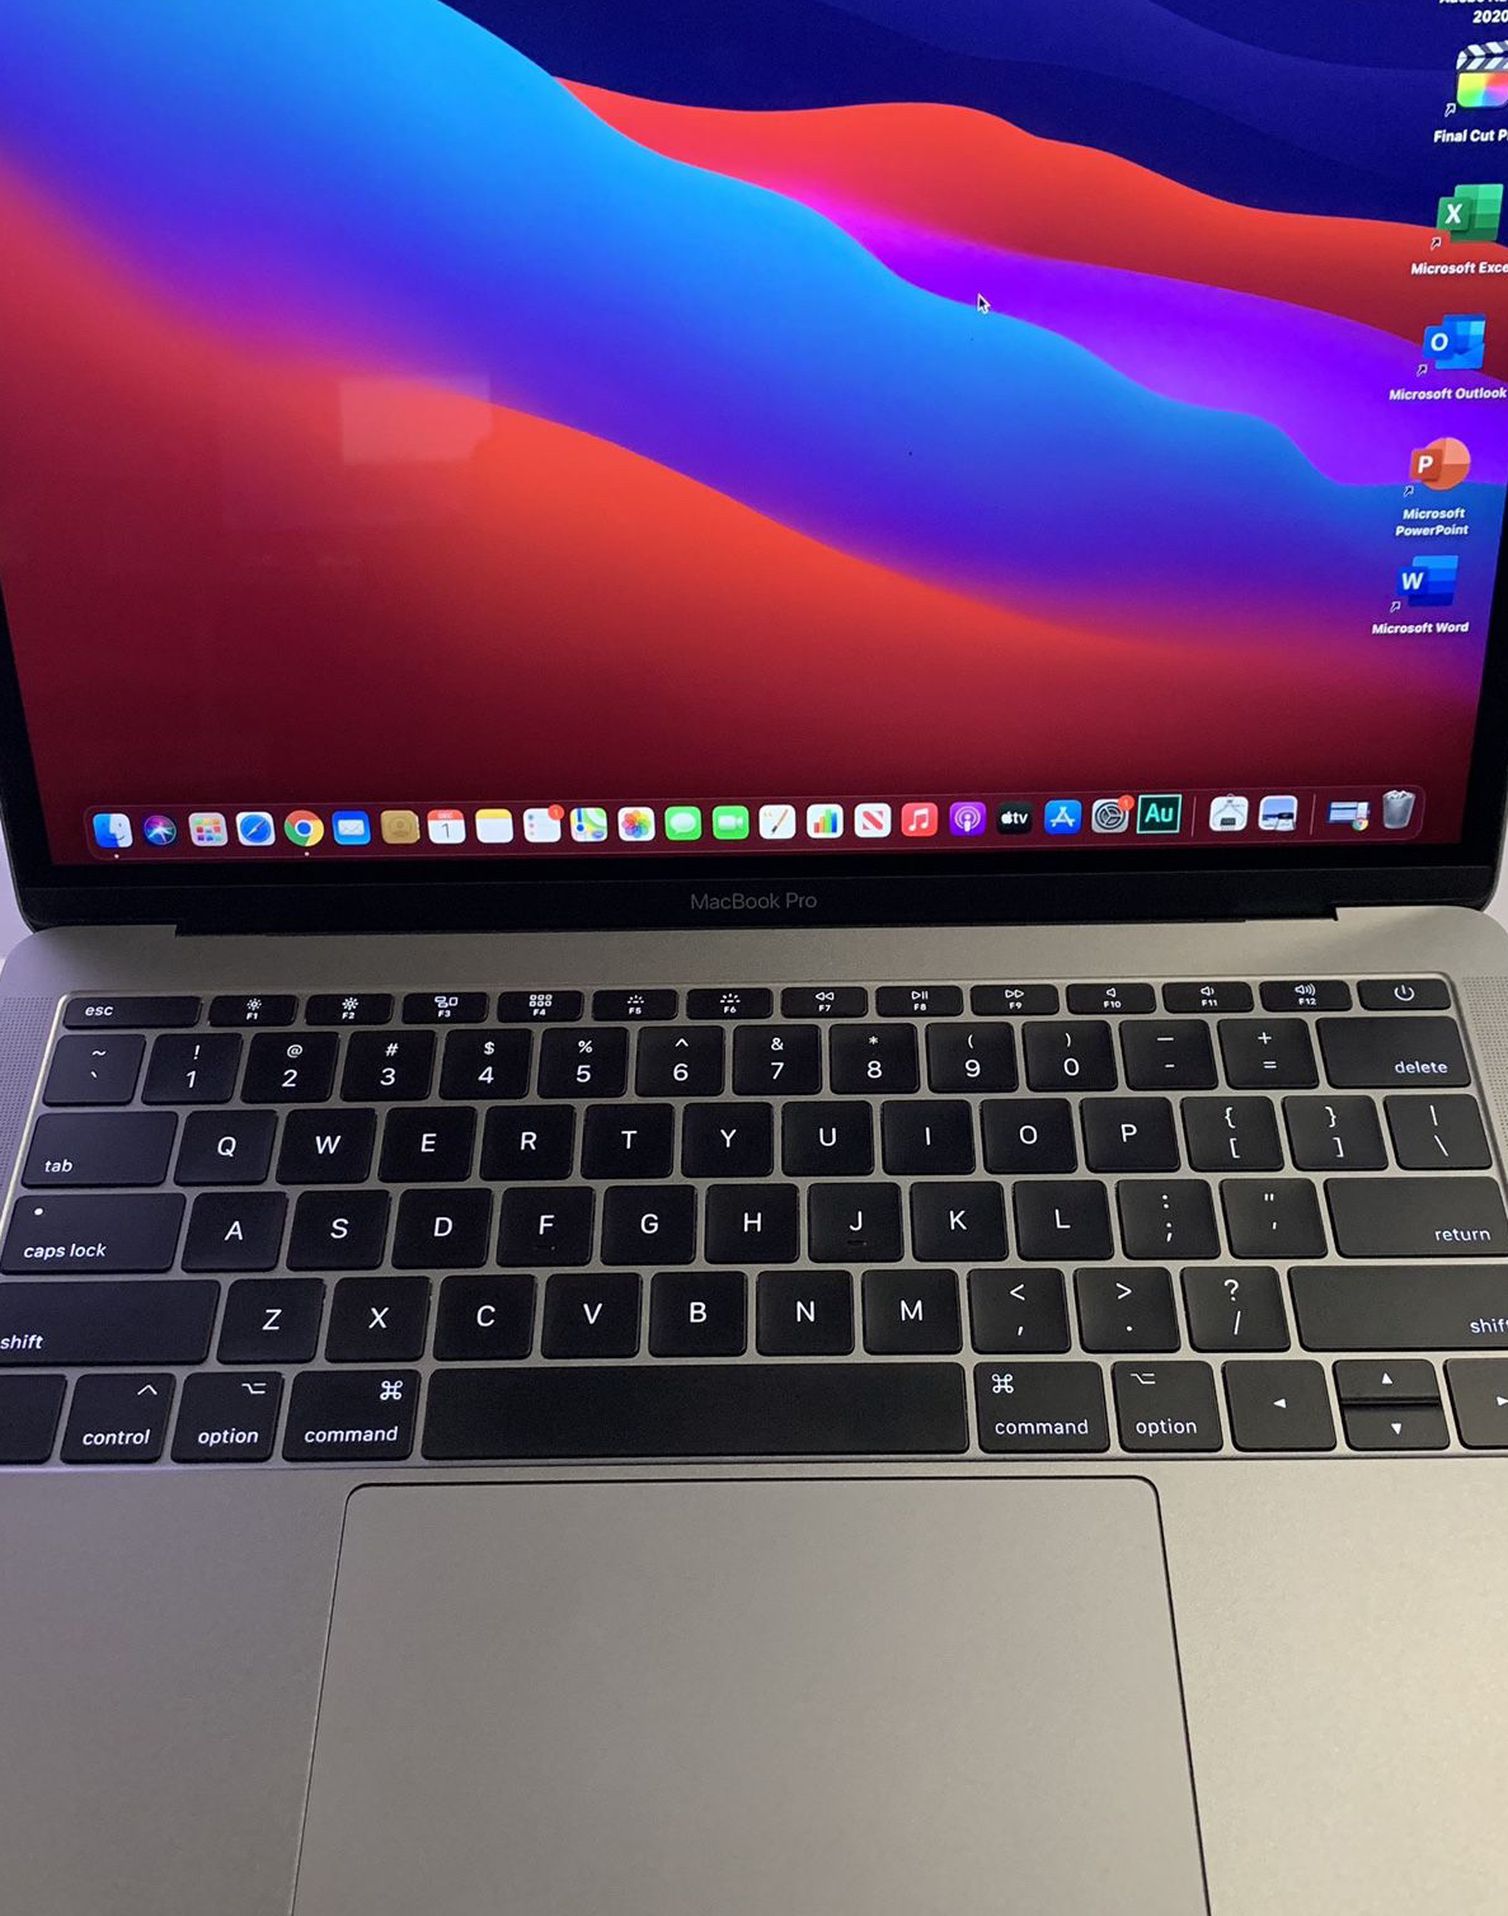 (2017) MacBook Pro Pro 13” - Final Cut Pro & Adobe Audition Included! (Great Condition)